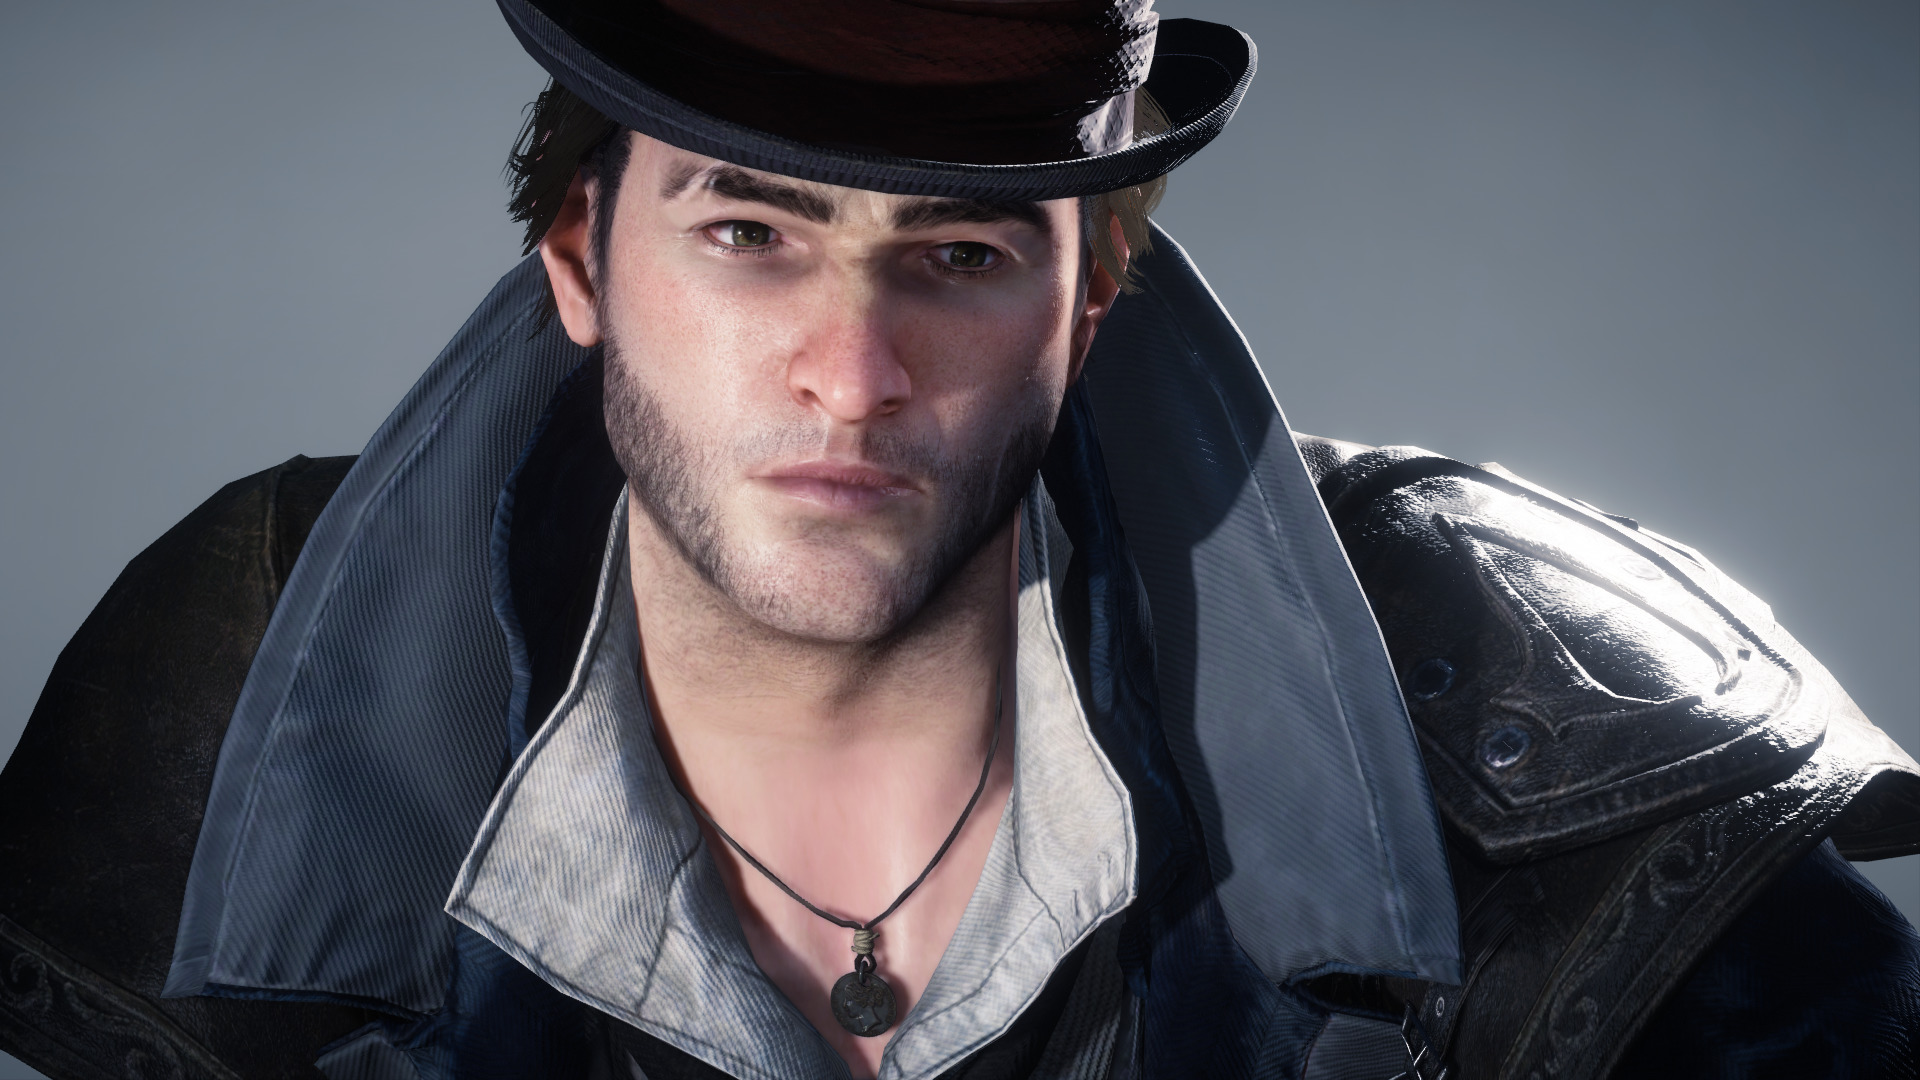 Assassins Creed, Jacob Frye, Syndicate,  Assassins Creed Syndicate Wallpaper